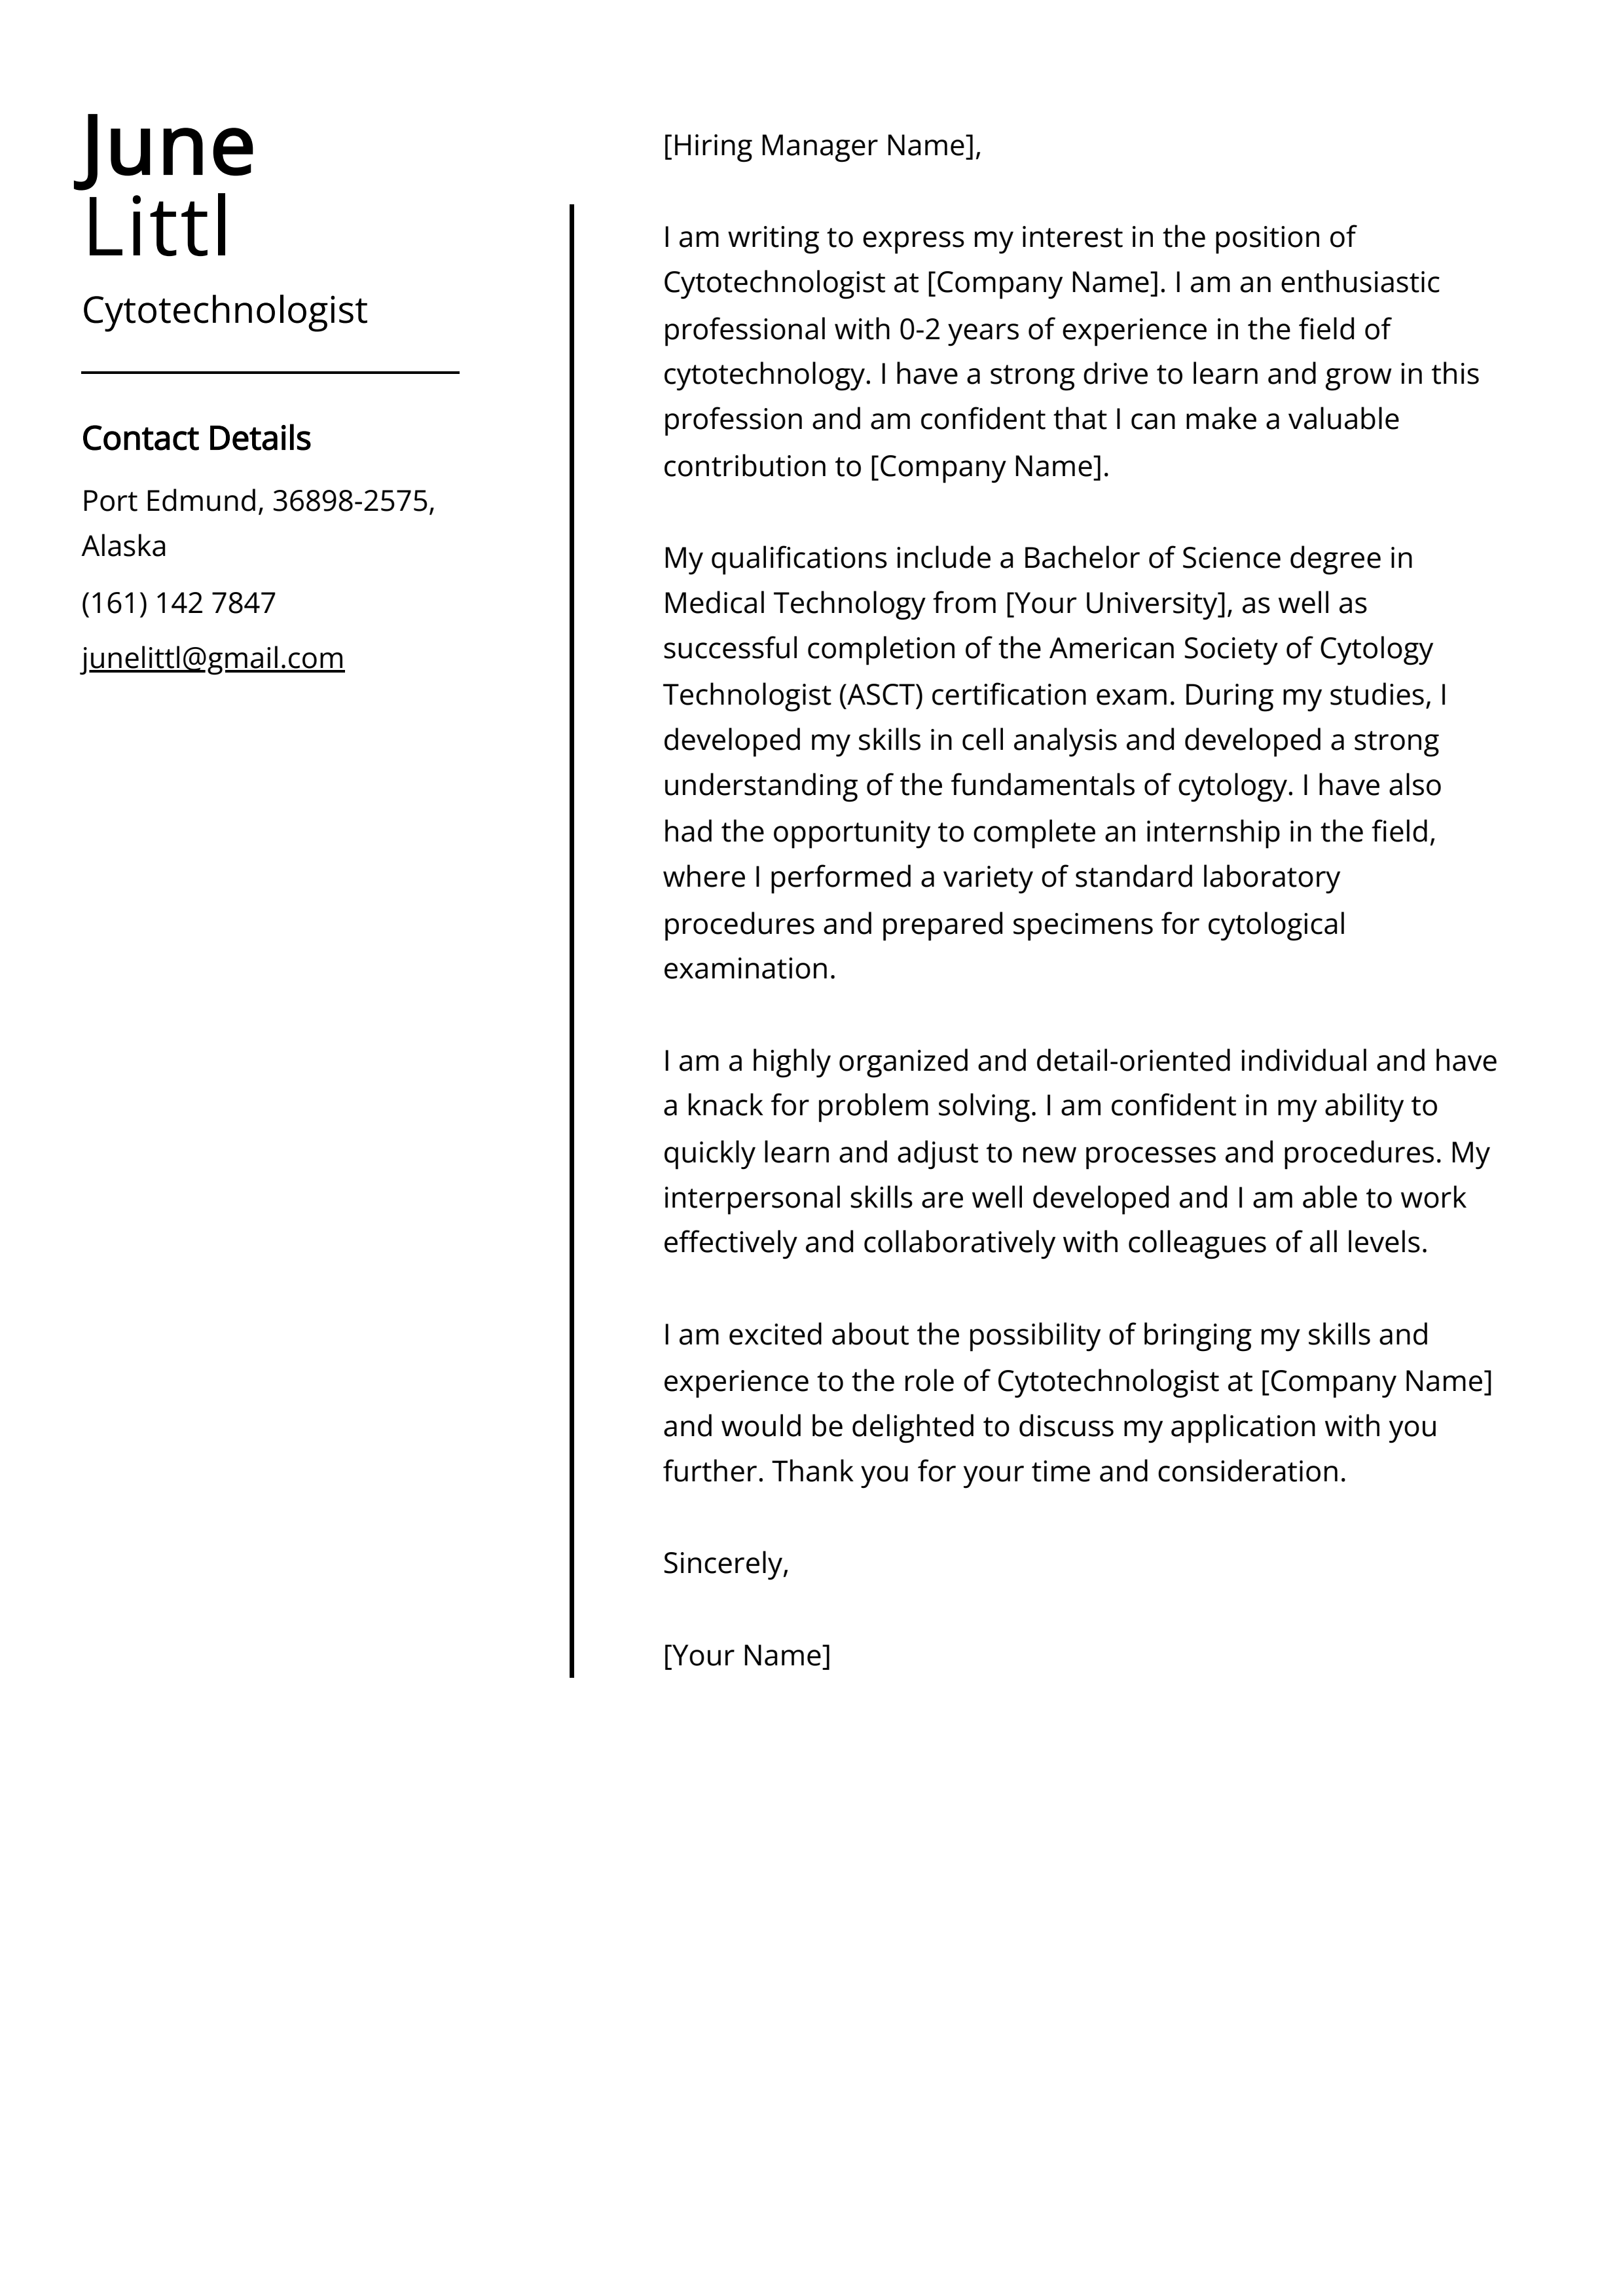 Cytotechnologist Cover Letter Example